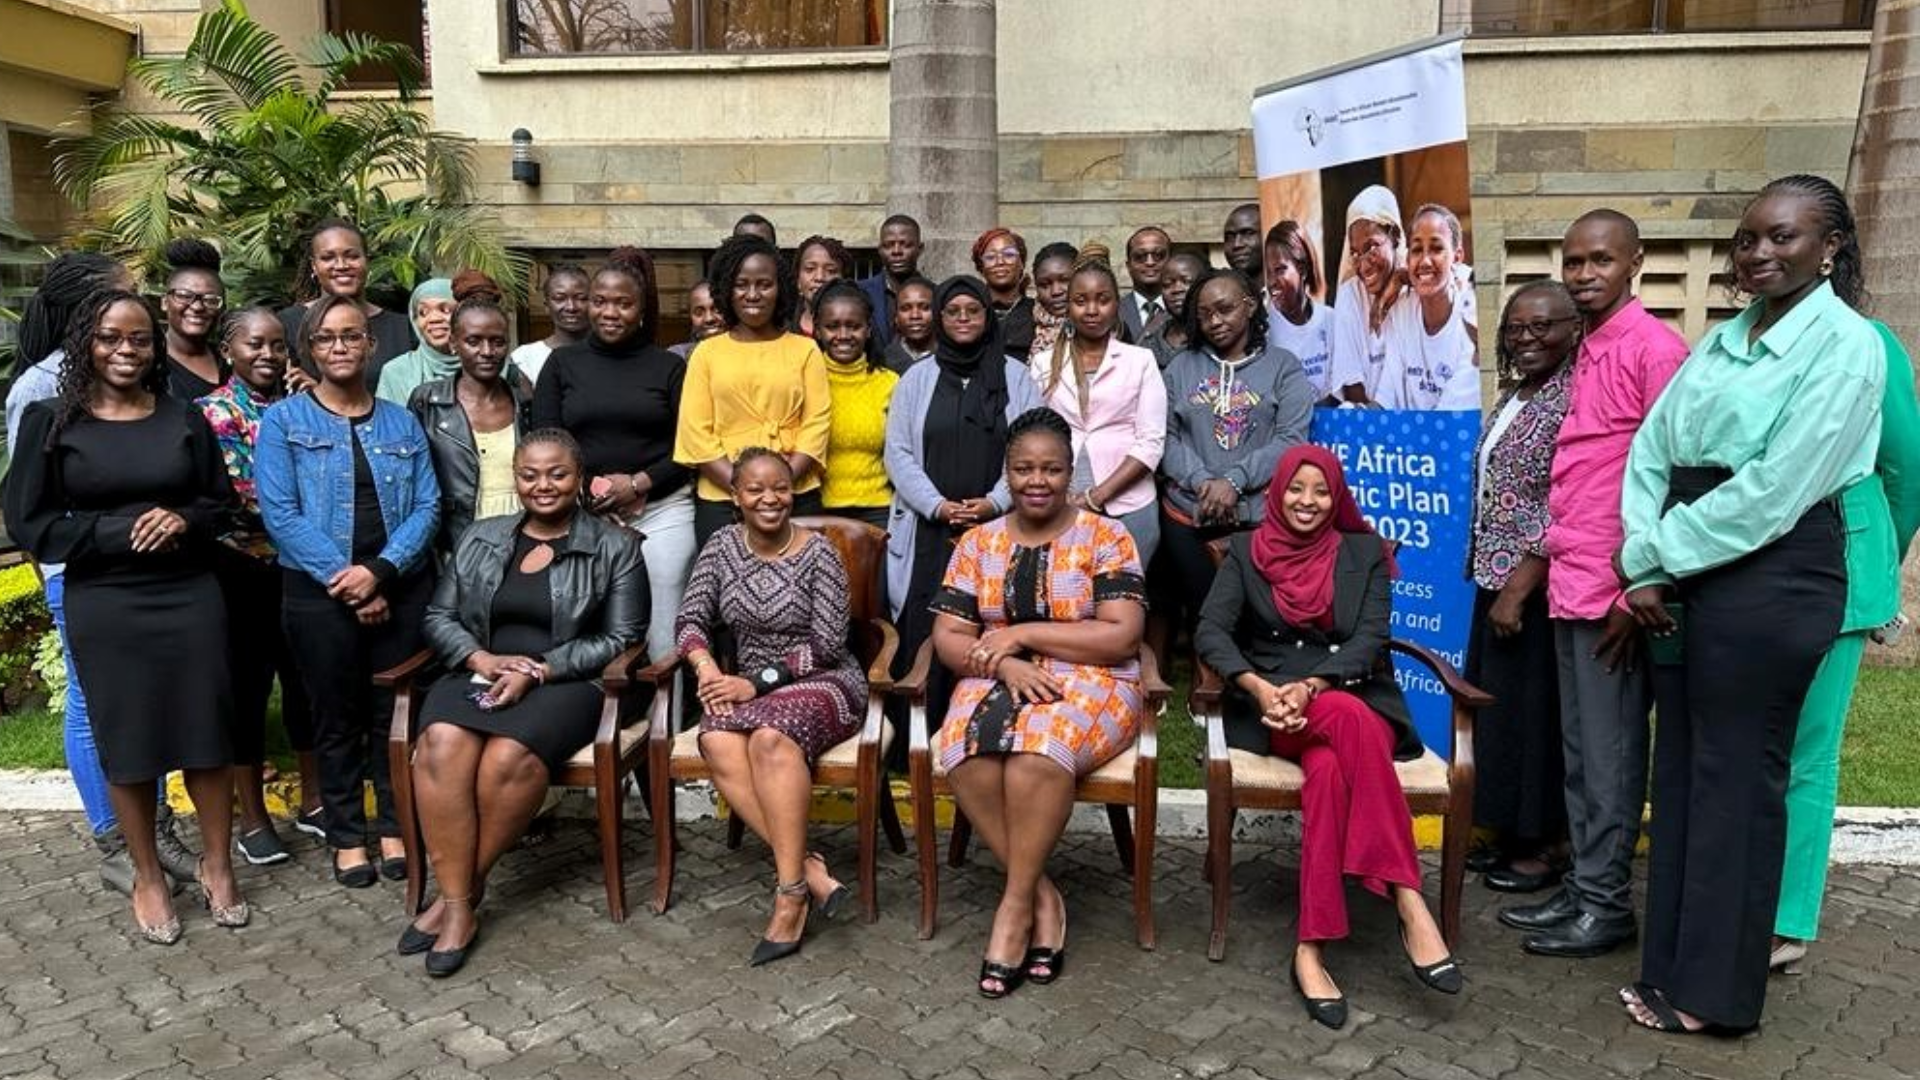 Group photo of journalists, editors and members of staff from FAWE, International IDEA, FEMNET and AMWIK during the media training. Source: FAWE